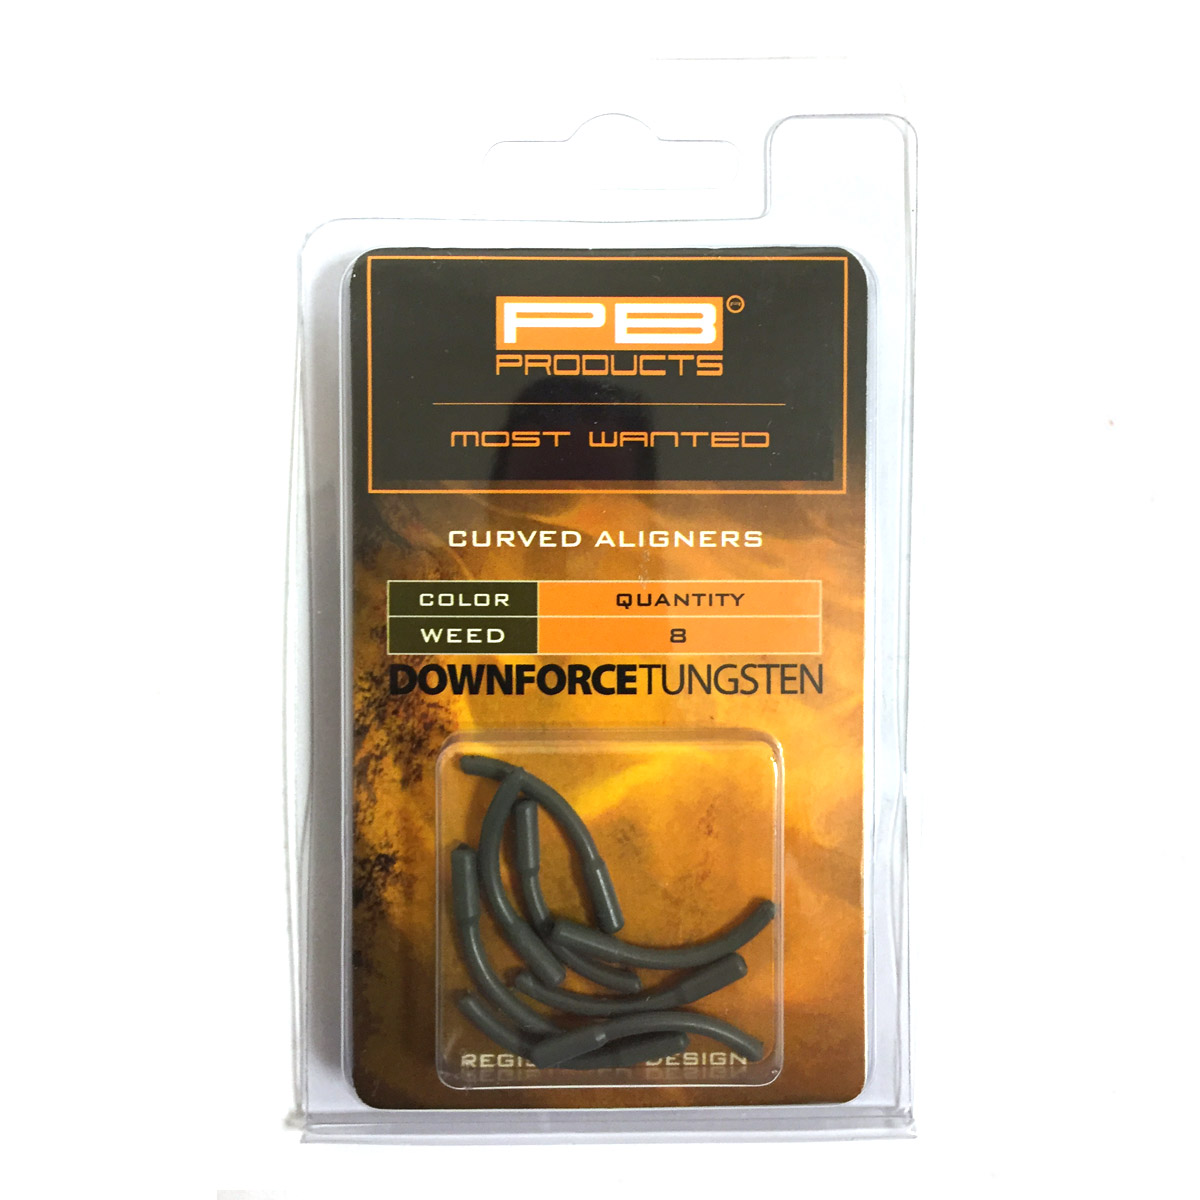 PB Products Downforce Tungsten Curved Aligners